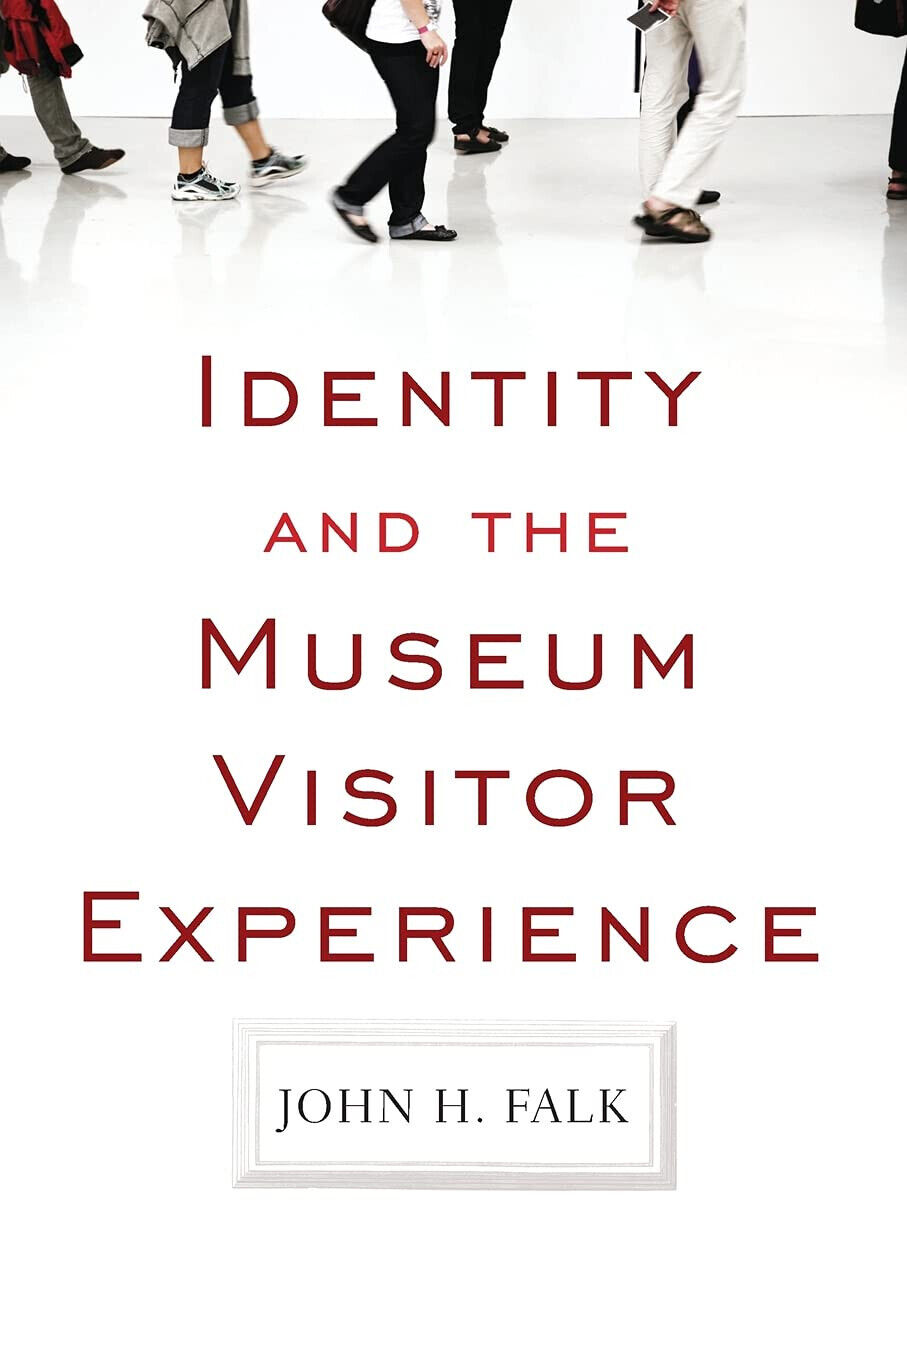 Identity and the Museum Visitor Experience - John H. Falk - Routledge, 2012 libro usato